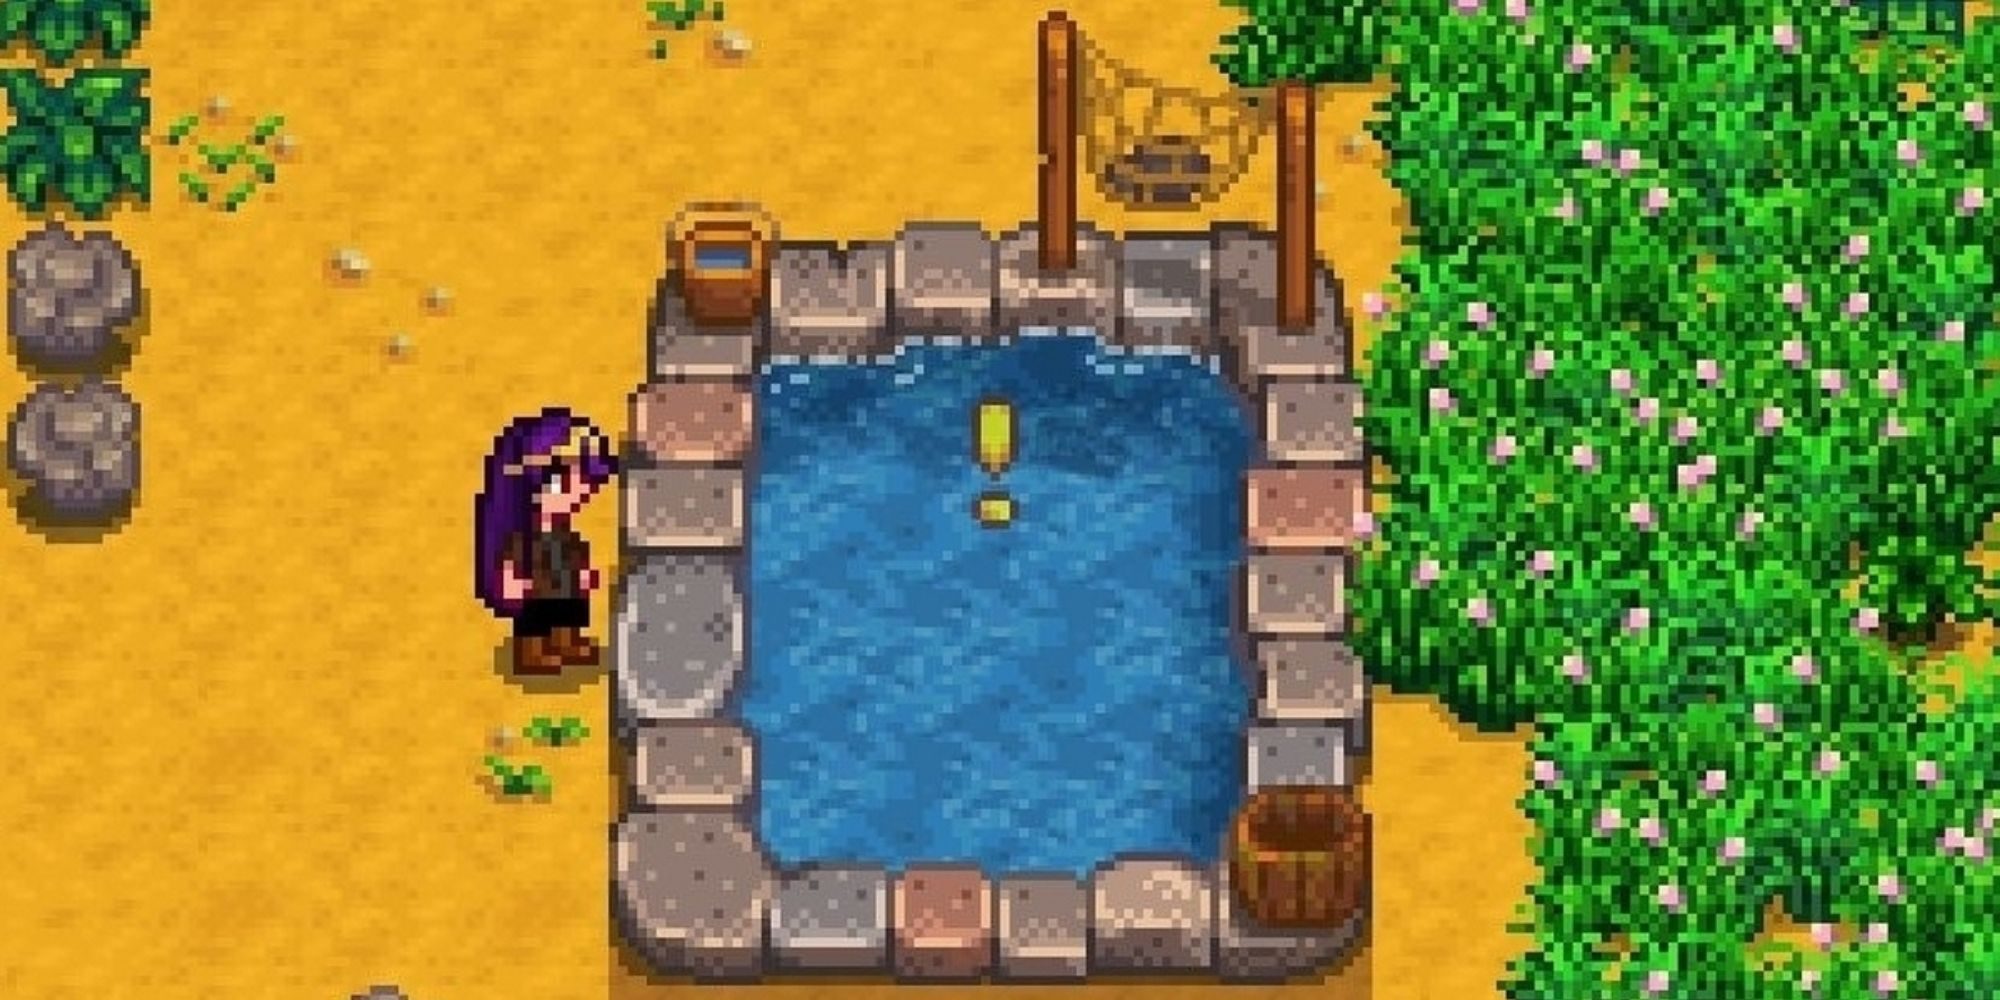 stardew-valley-fish-pond-with-quest-gameplay-screenshot-7028822